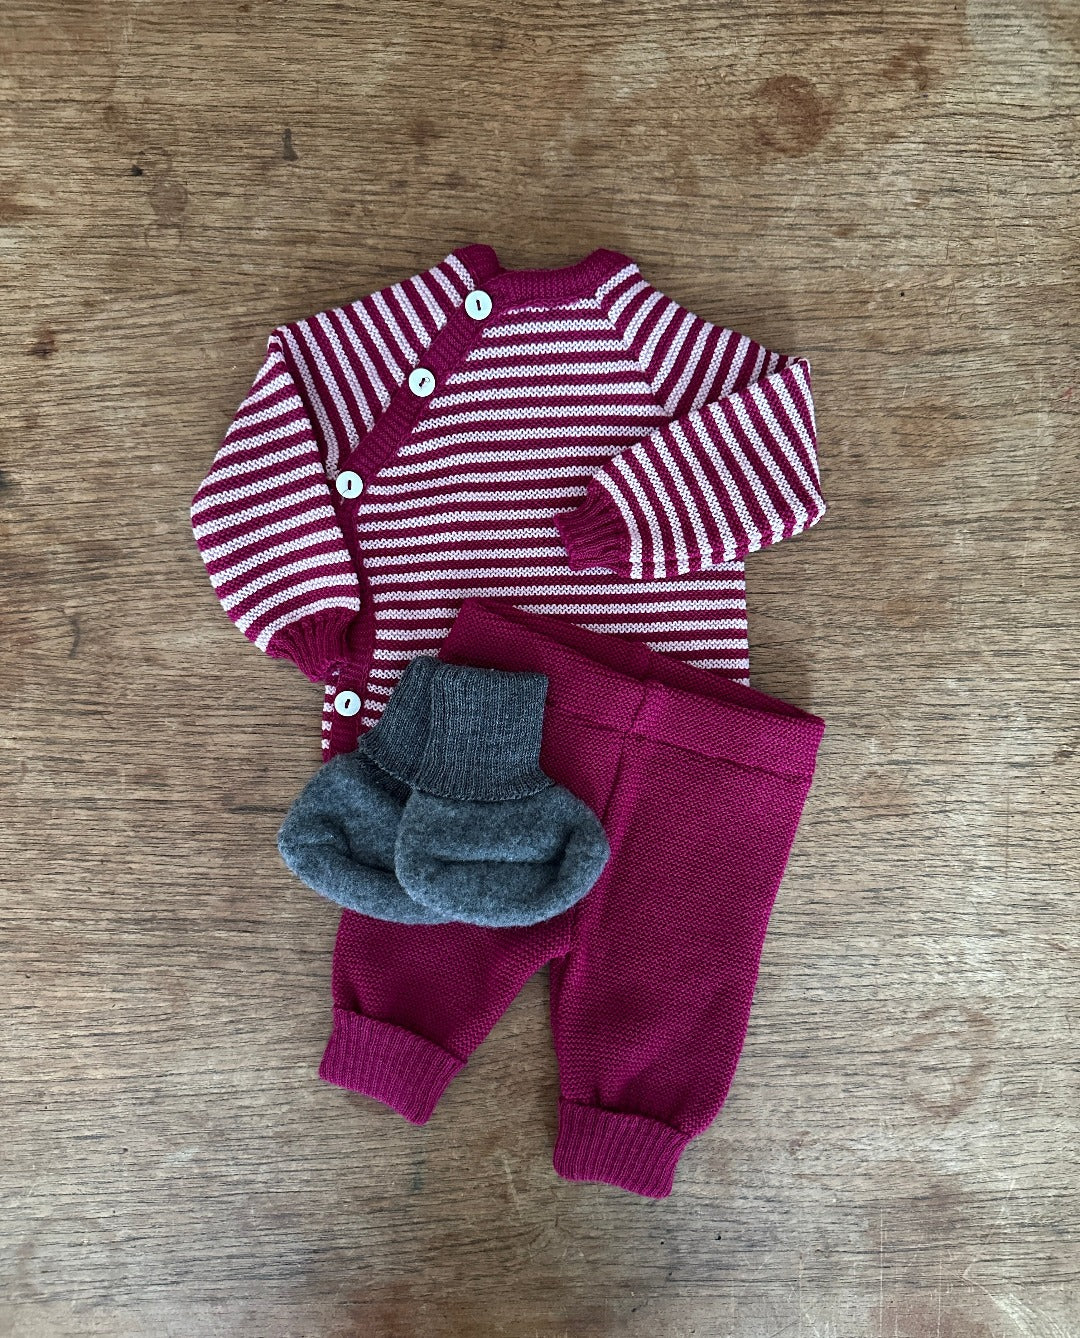 Striped wool cardigan in berry and pink. Berry wool knit pants and charcoal wool fleece booties. All made by Reiff